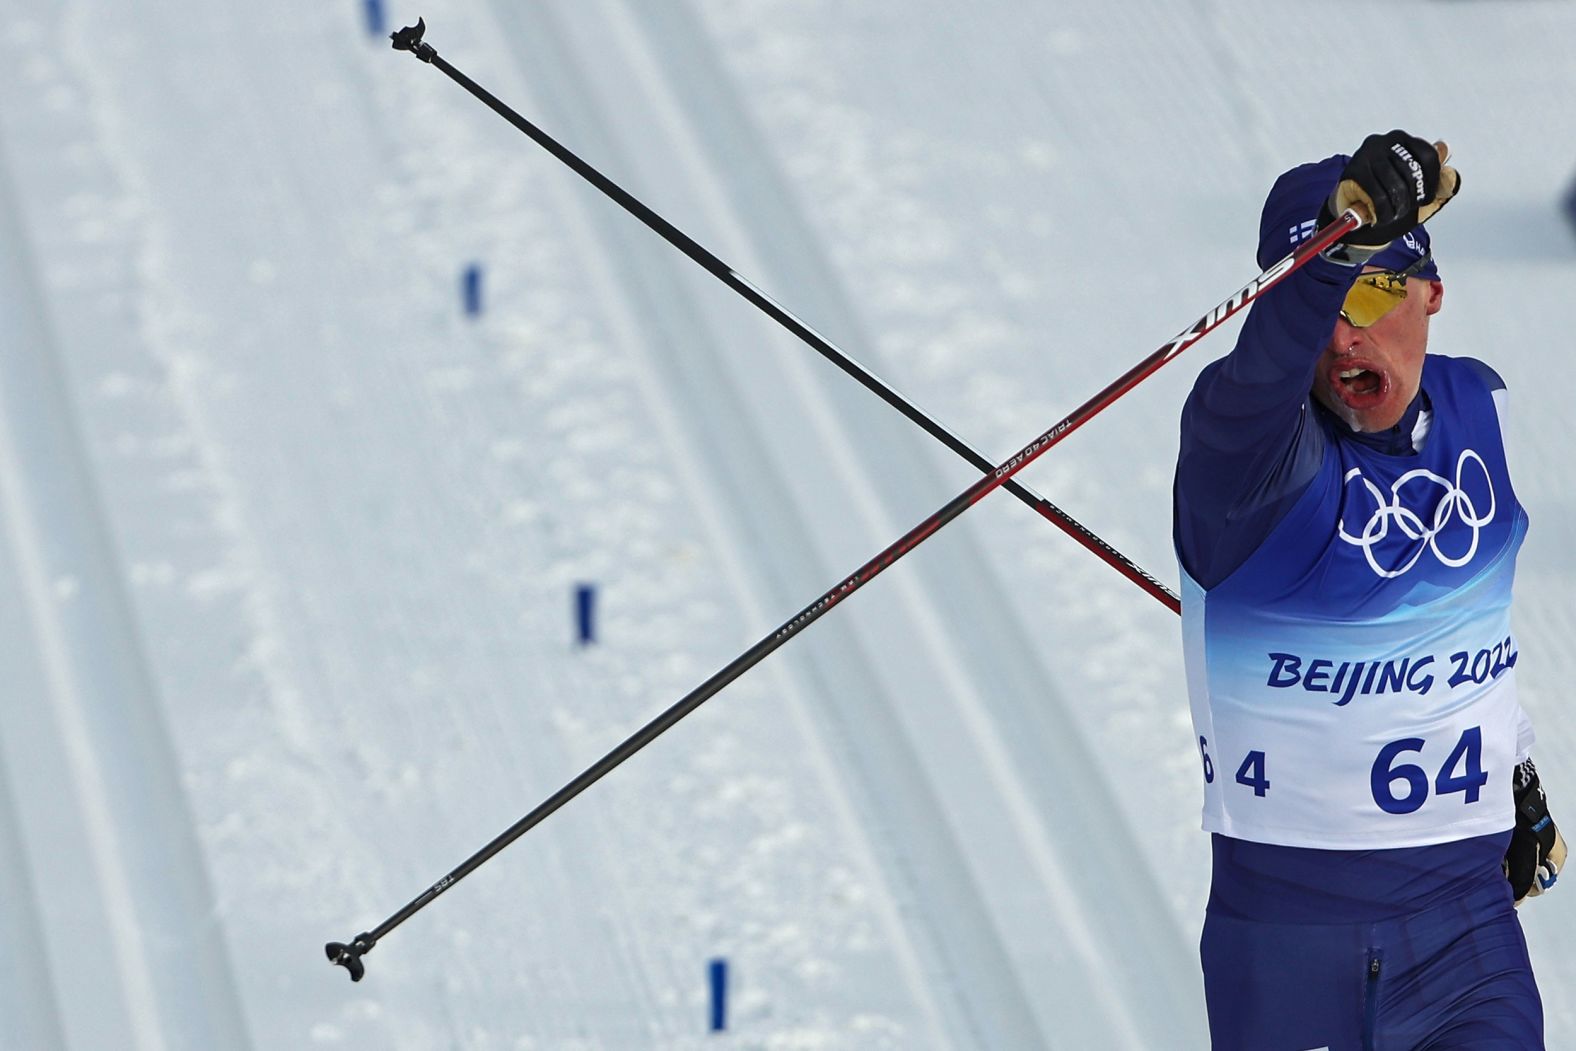 Finnish cross-country skier Iivo Niskanen reacts after<a href="index.php?page=&url=https%3A%2F%2Fwww.cnn.com%2Fworld%2Flive-news%2Fbeijing-winter-olympics-02-11-22-spt%2Fh_18d661345e8fb473c71d9d01be5d823e" target="_blank"> winning the classical 15-kilometer race</a> on February 11.